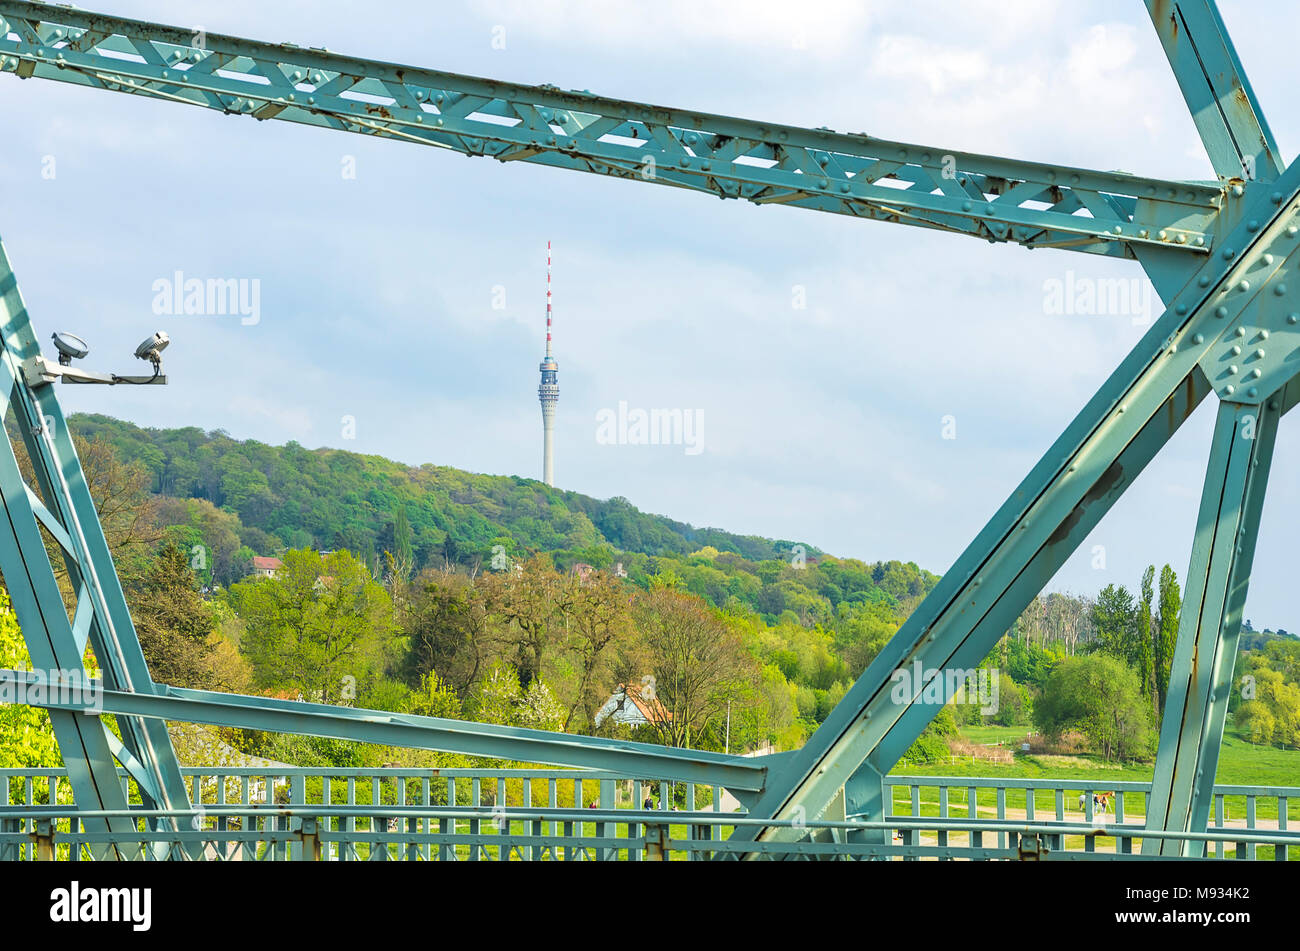 Dresden, Saxony, Germany - The television tower viewed between braces of the Blue Wonder Bridge. Stock Photo